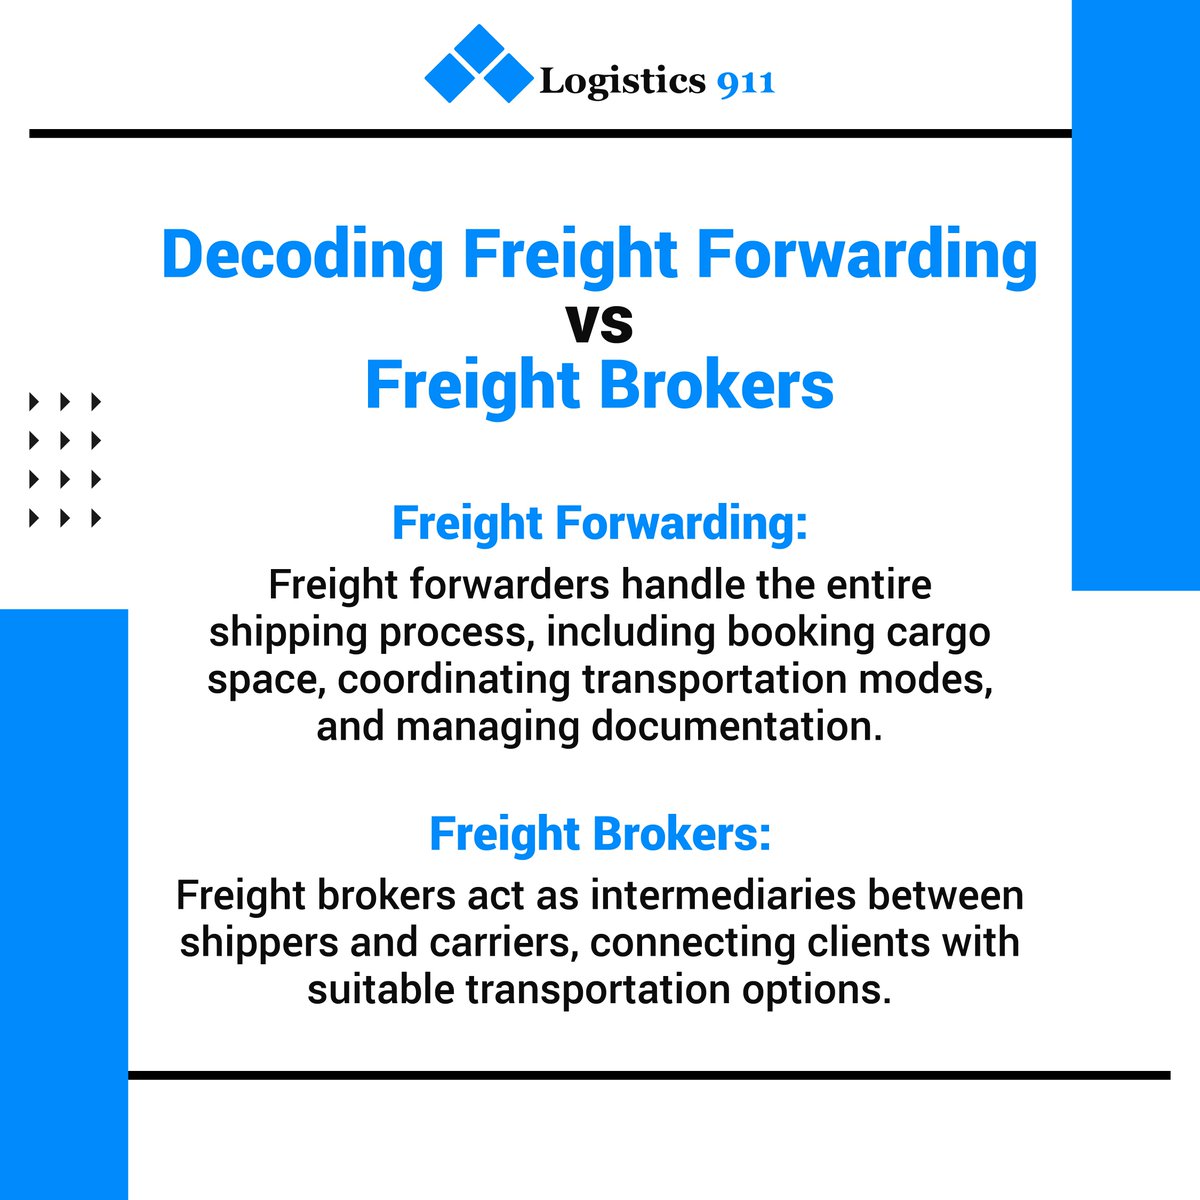 🚢🚚 Unveiling the differences between freight forwarding and freight brokers. Choose the right path for your logistics needs!

For more information visit: logistics911.com

#LogisticsInsights #FreightForwarding #FreightBrokers #Shipping #Logistics #LogisticsTraining